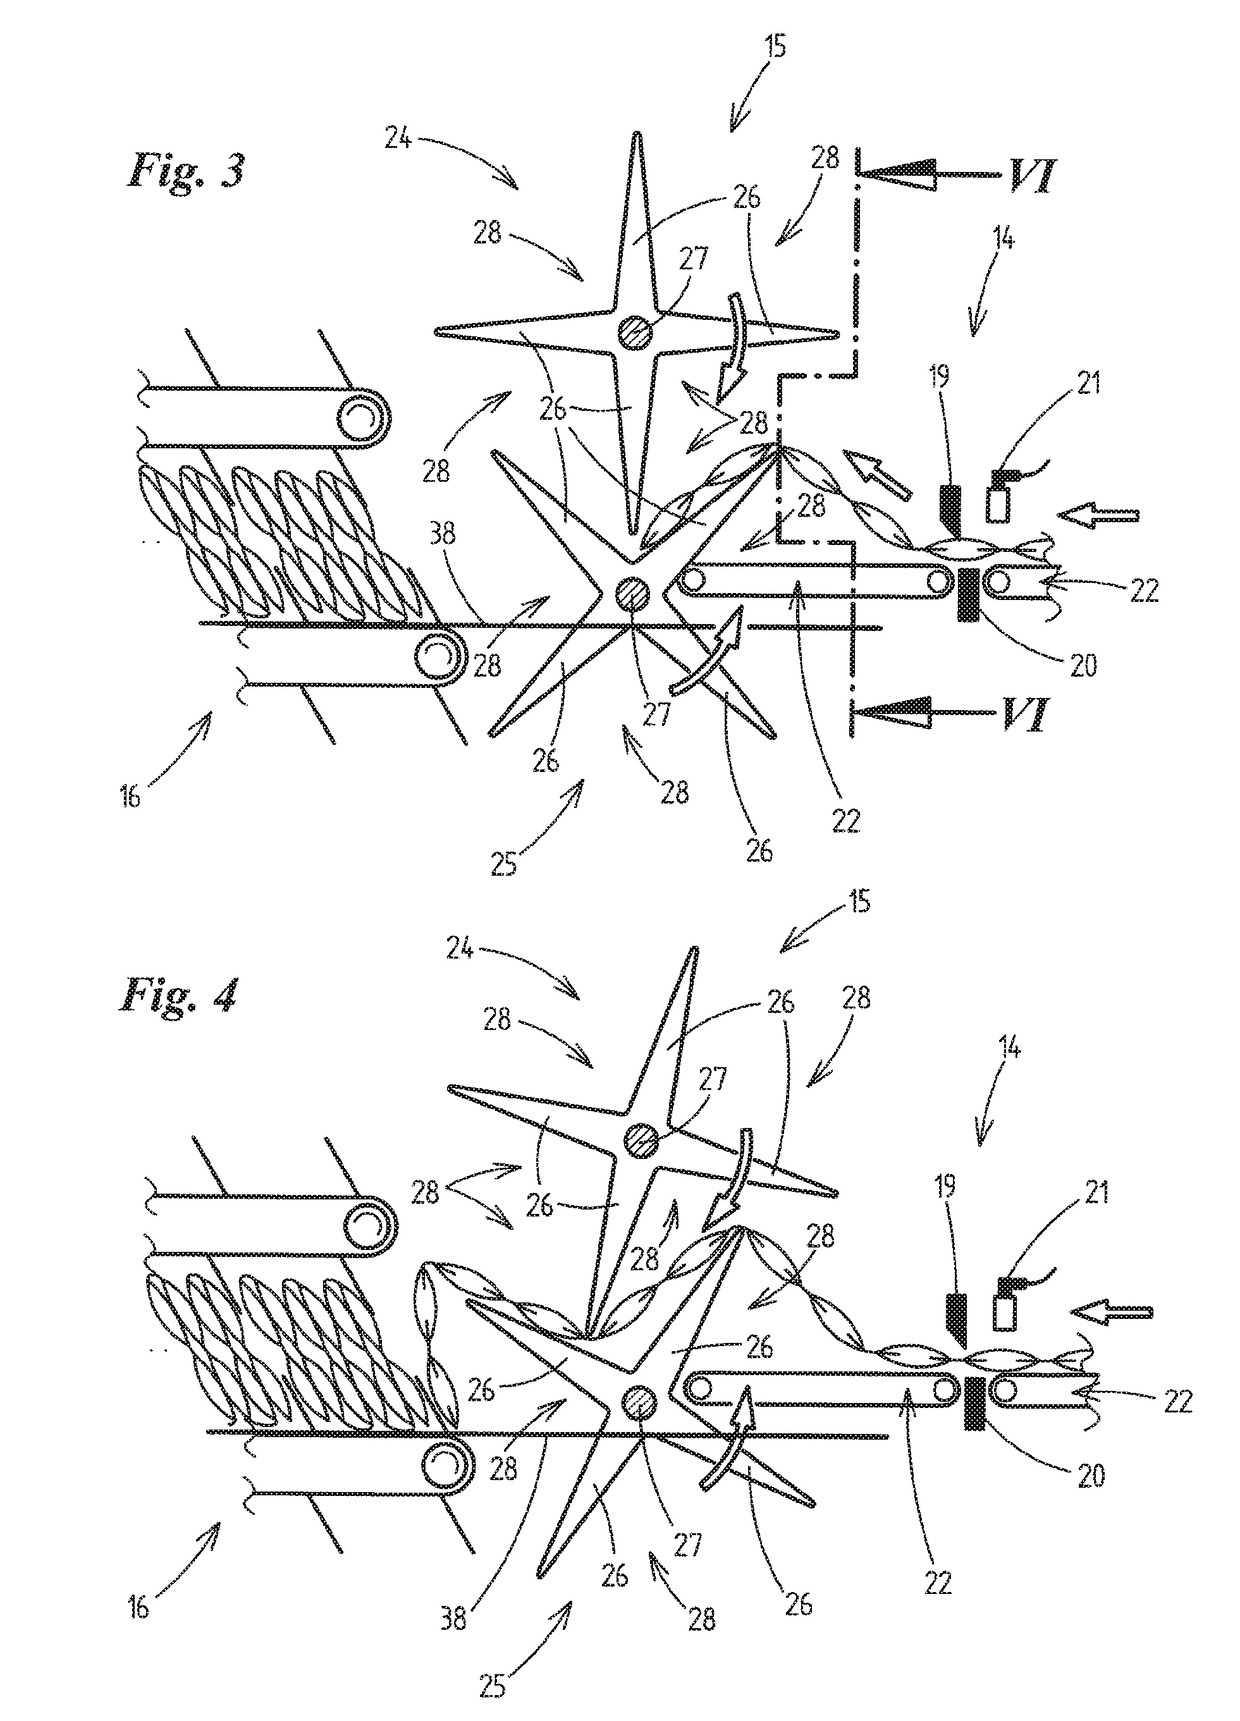 Method and device for handling bag chains